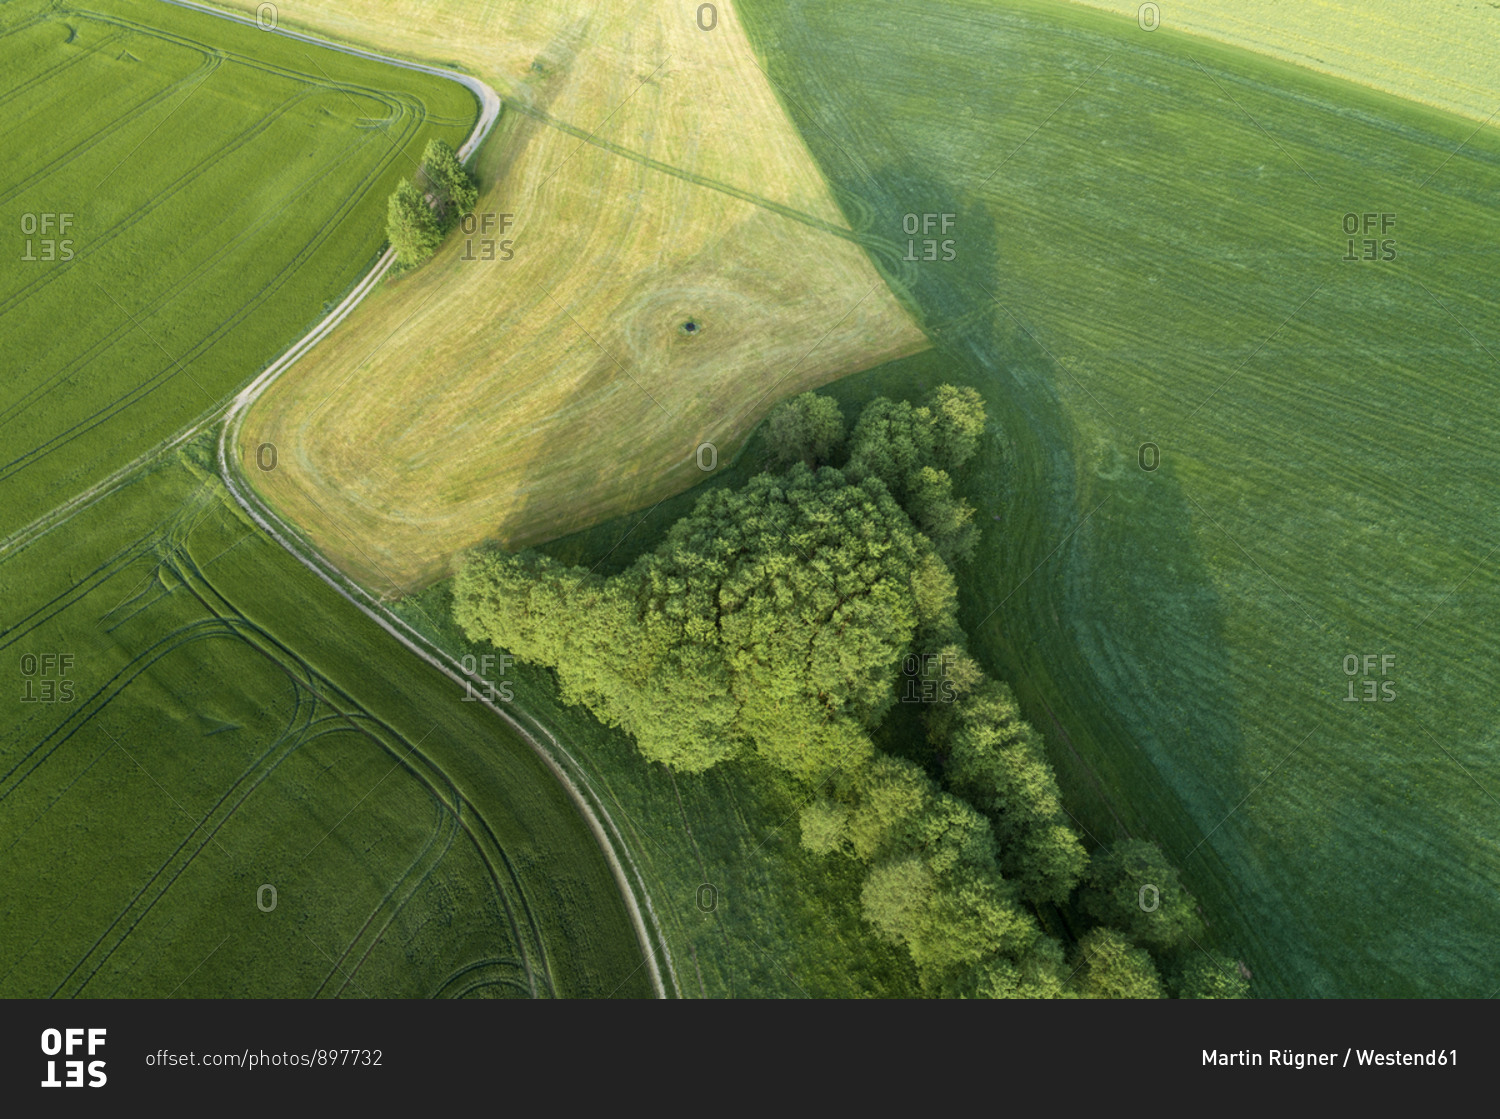 Germany- Thuringia- Aerial view of dirt road cutting through green countryside field